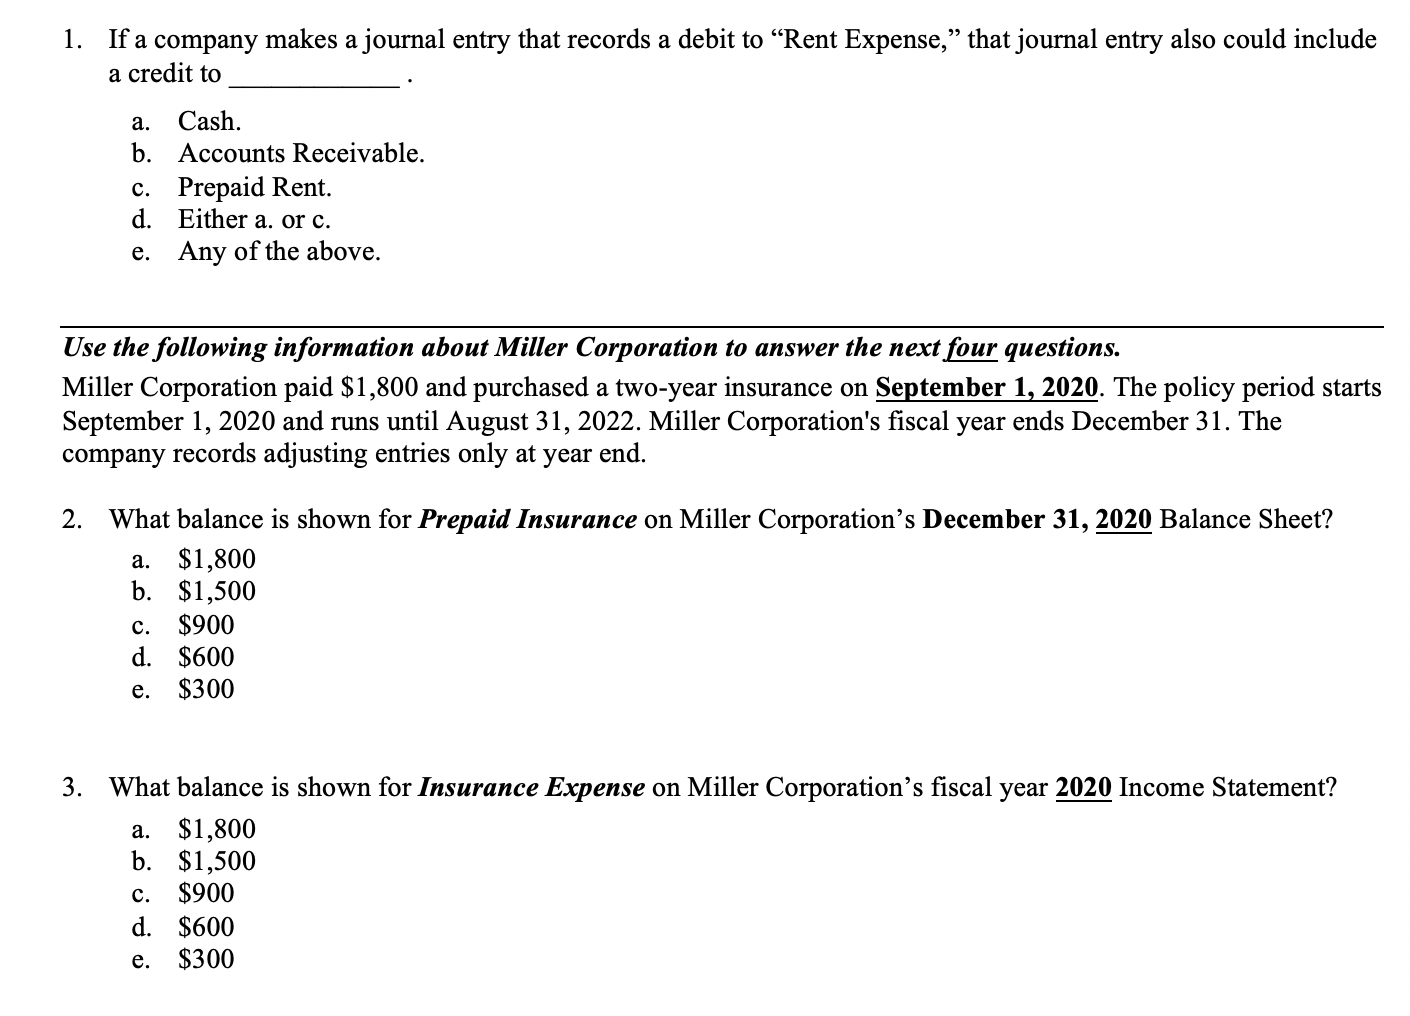 If a company makes a journal entry that records a debit to "Rent Expense," that journal entry also could include
a credit to
1.
а.
Cash.
b. Accounts Receivable.
c. Prepaid Rent.
d. Either a. or c.
e. Any of the above.
Use the following information about Miller Corporation to answer the next four questions.
Miller Corporation paid $1,800 and purchased a two-year insurance on September 1, 2020. The policy period starts
September 1, 2020 and runs until August 31, 2022. Miller Corporation's fiscal year ends December 31. The
company records adjusting entries only at year end.
2.
What balance is shown for Prepaid Insurance on Miller Corporation's December 31, 2020 Balance Sheet?
a. $1,800
b. $1,500
$900
d. $600
$300
с.
е.
3.
What balance is shown for Insurance Expense on Miller Corporation's fiscal year 2020 Income Statement?
a. $1,800
b. $1,500
$900
d. $600
$300
с.
е.
